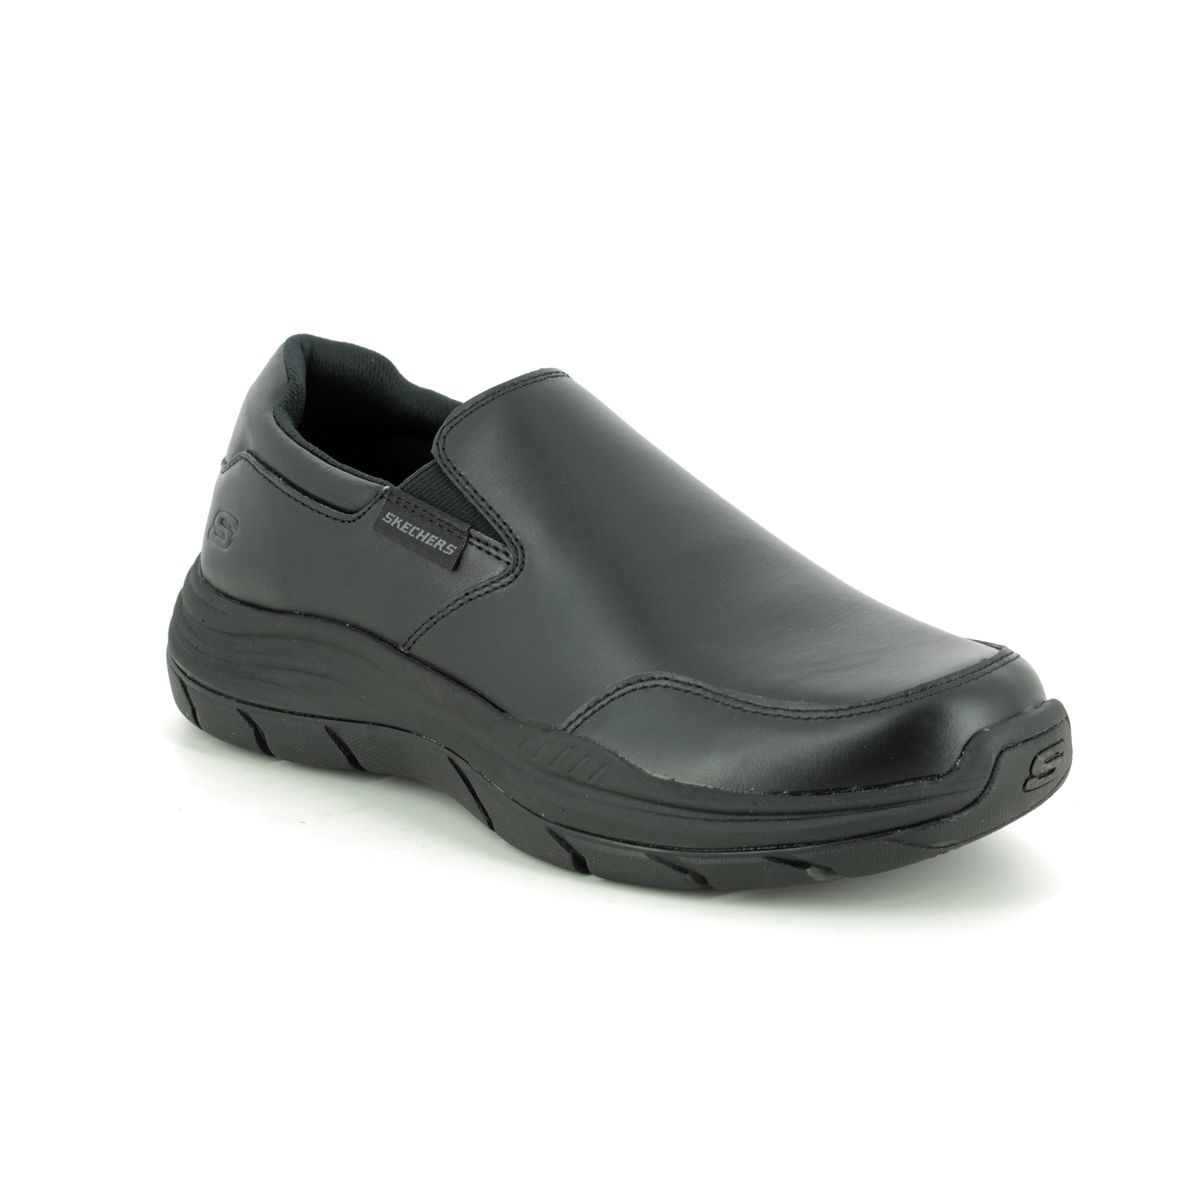 Skechers Olego Expected Relaxed BLK Black Mens Slip-on Shoes 66416 in a Plain Leather in Size 10